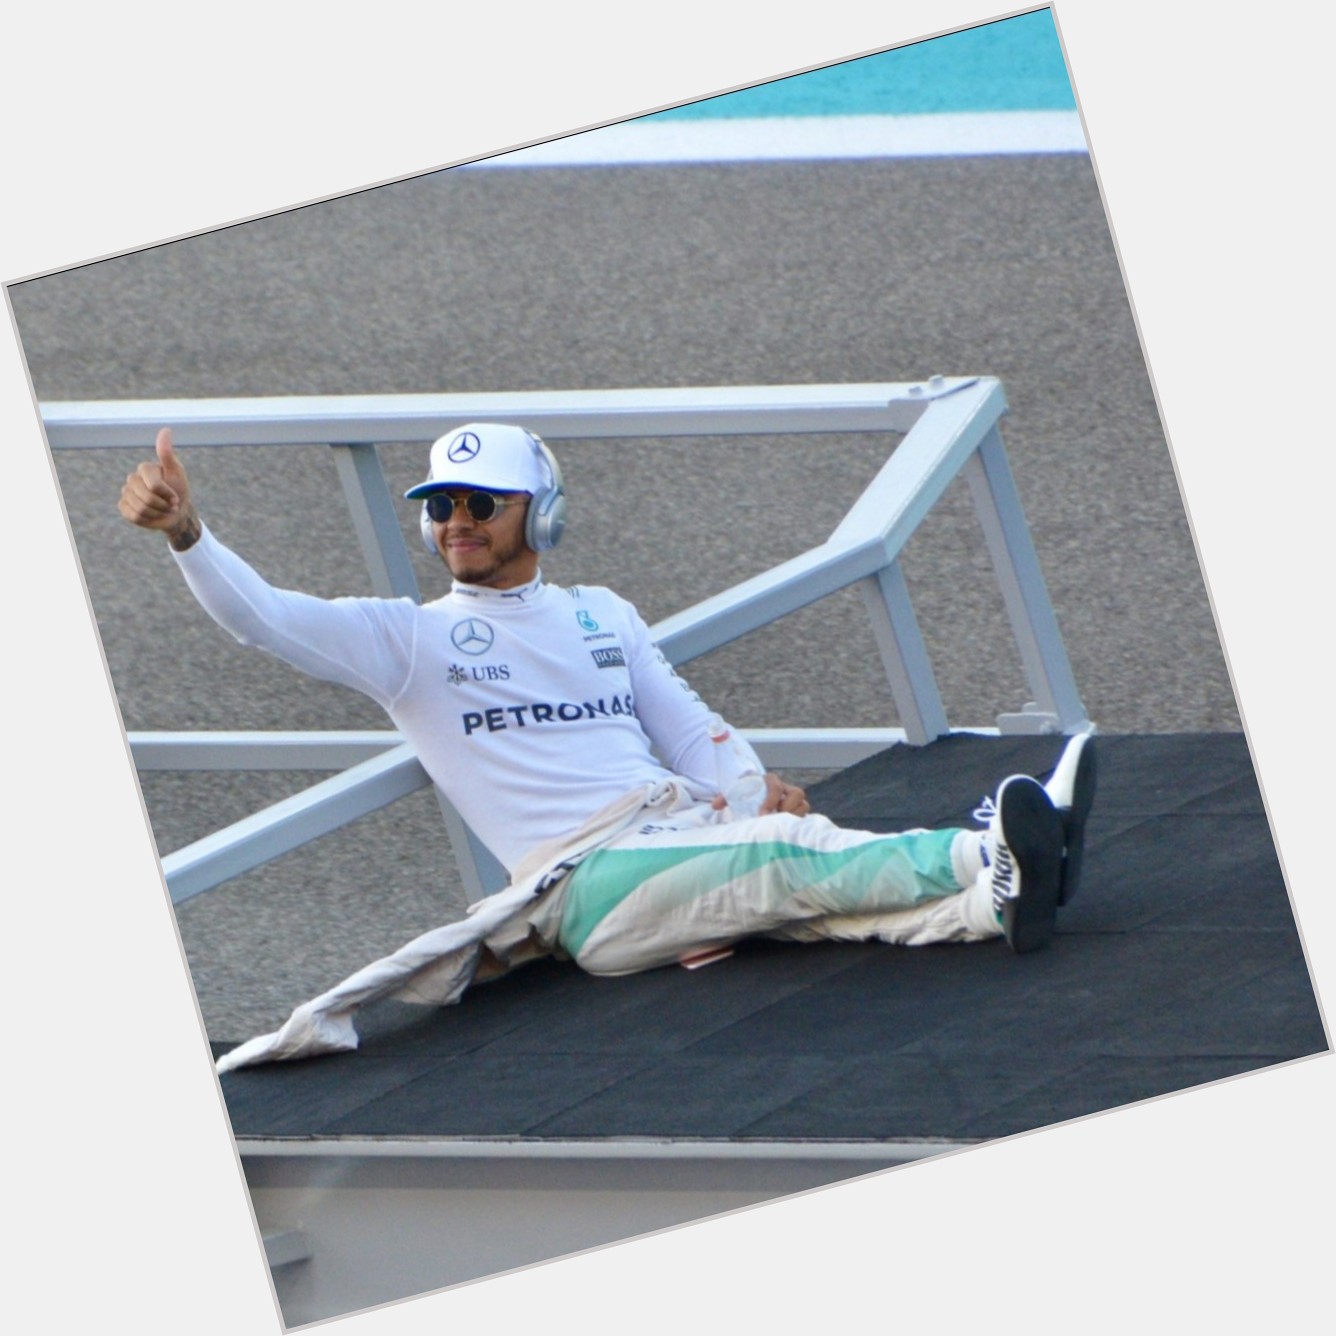 Happy 35th Birthday Lewis Hamilton! Good luck in 2020. See you at 